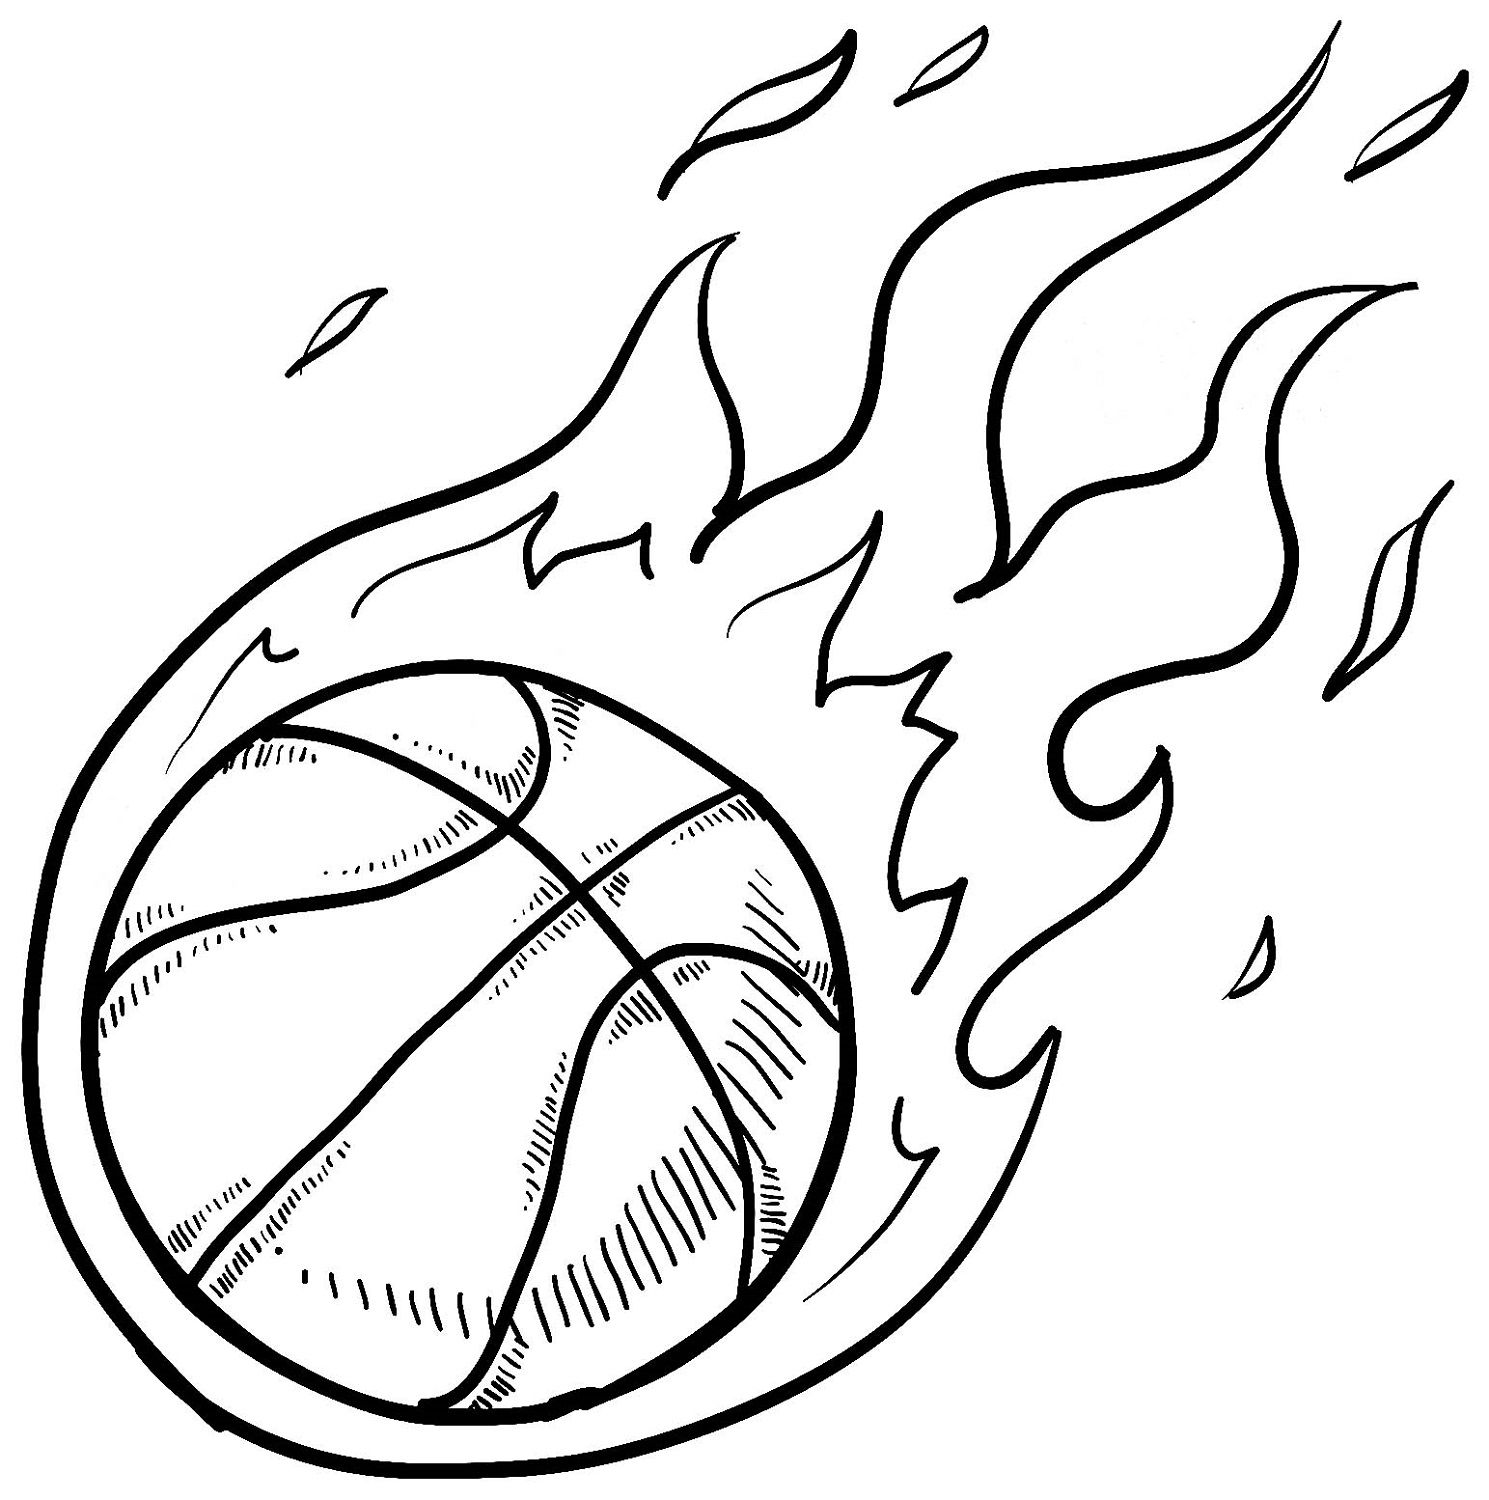 Basketball Coloring Sheets Interesting Basketball | Sports coloring pages, Coloring  pages, Heart coloring pages